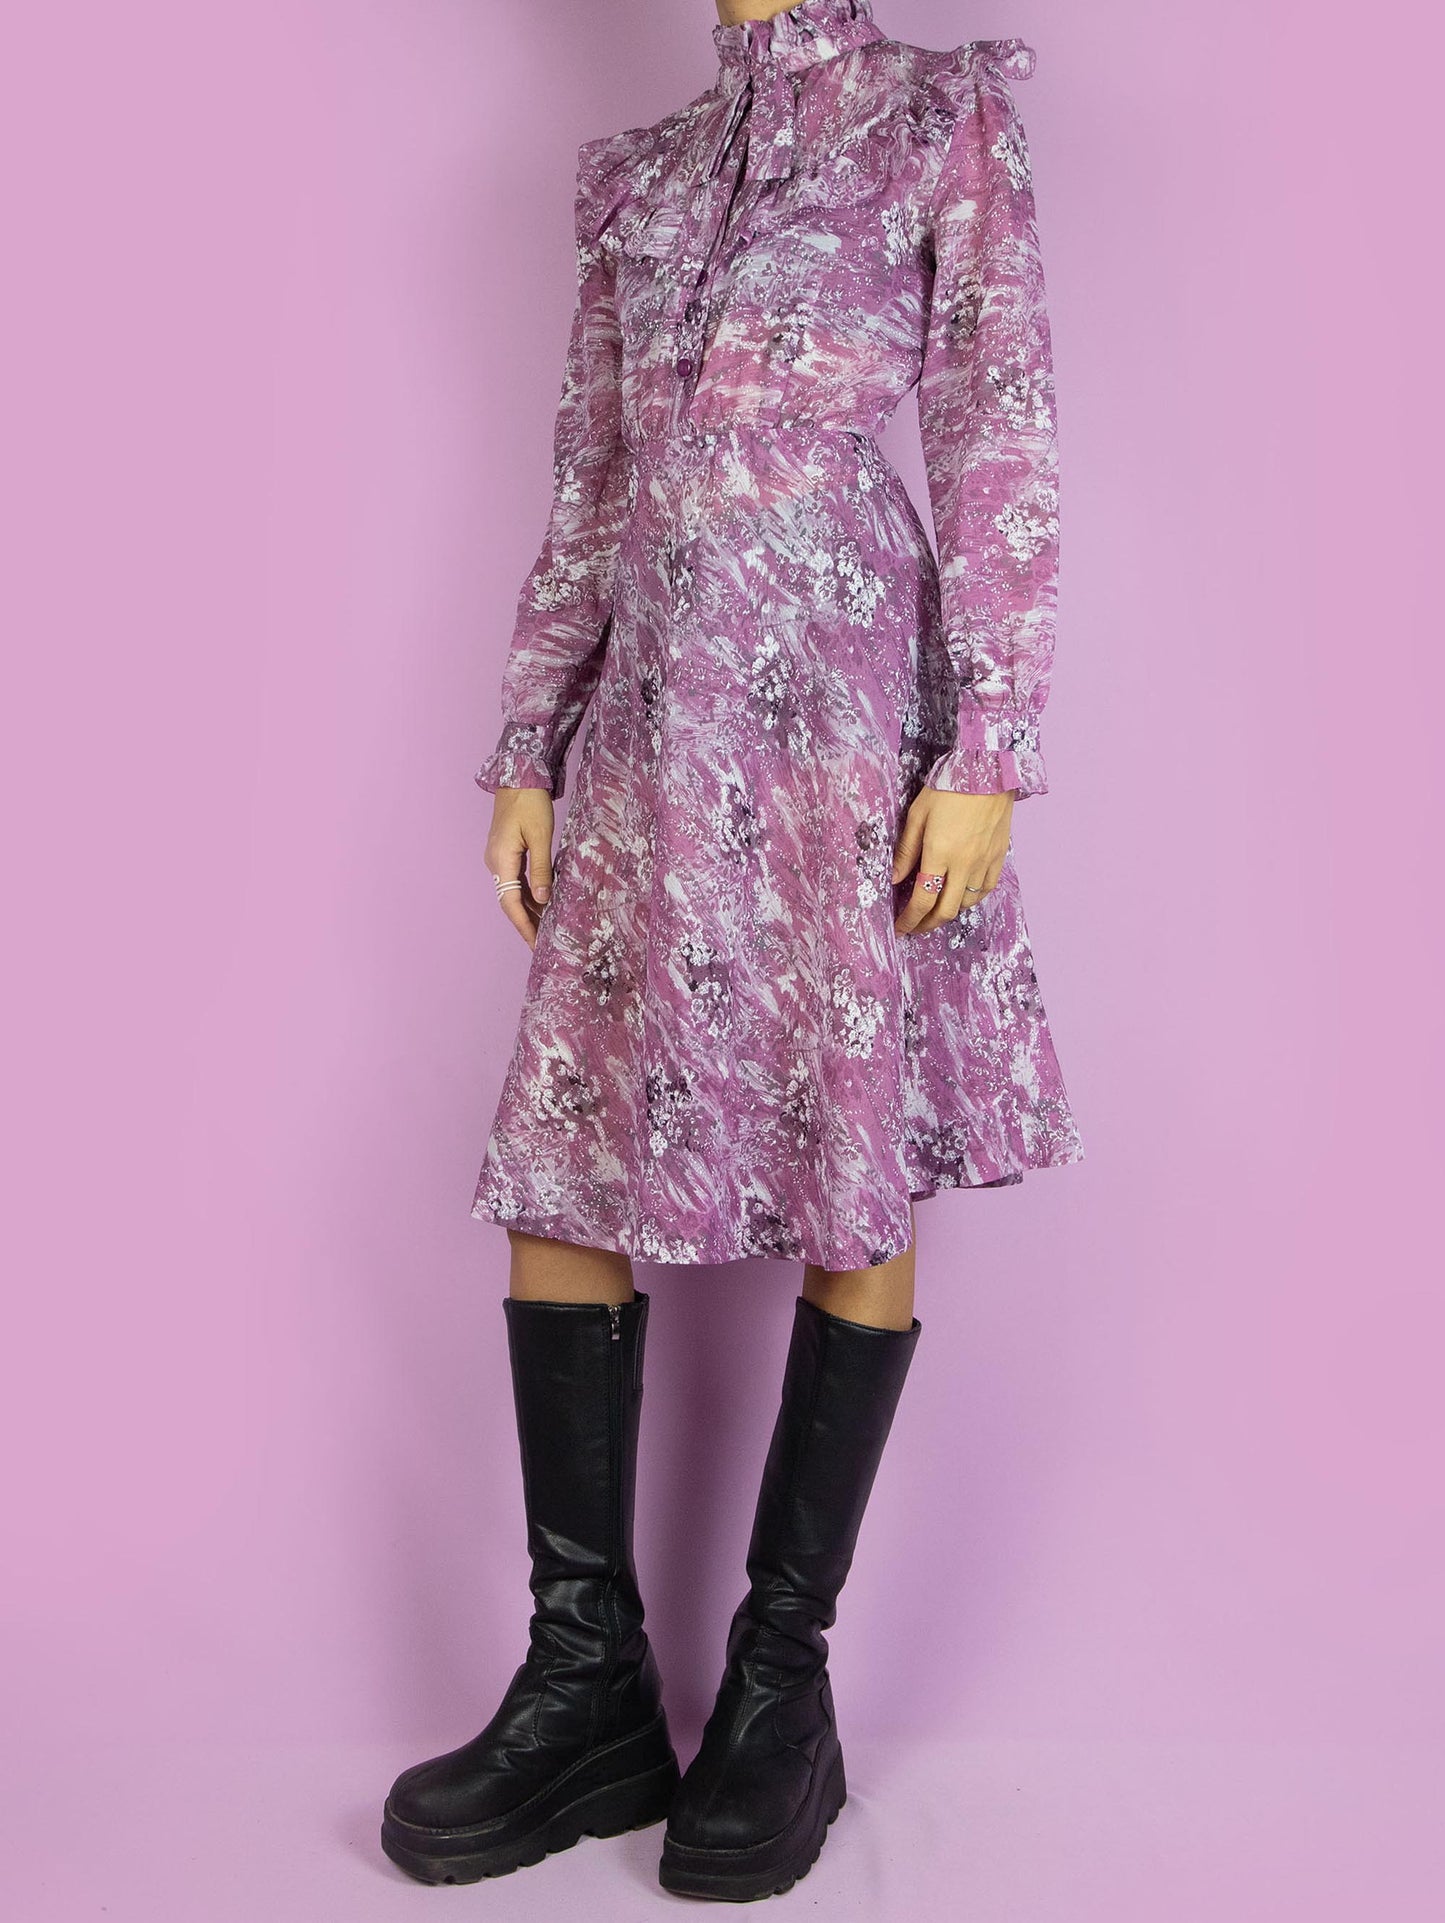 The Vintage 90s Purple Ruffle Collar Dress is a semi-sheer abstract purple dress with long sleeves, buttons, ruffles, and a bow at the collar. Boho retro 1990s romantic midi dress.